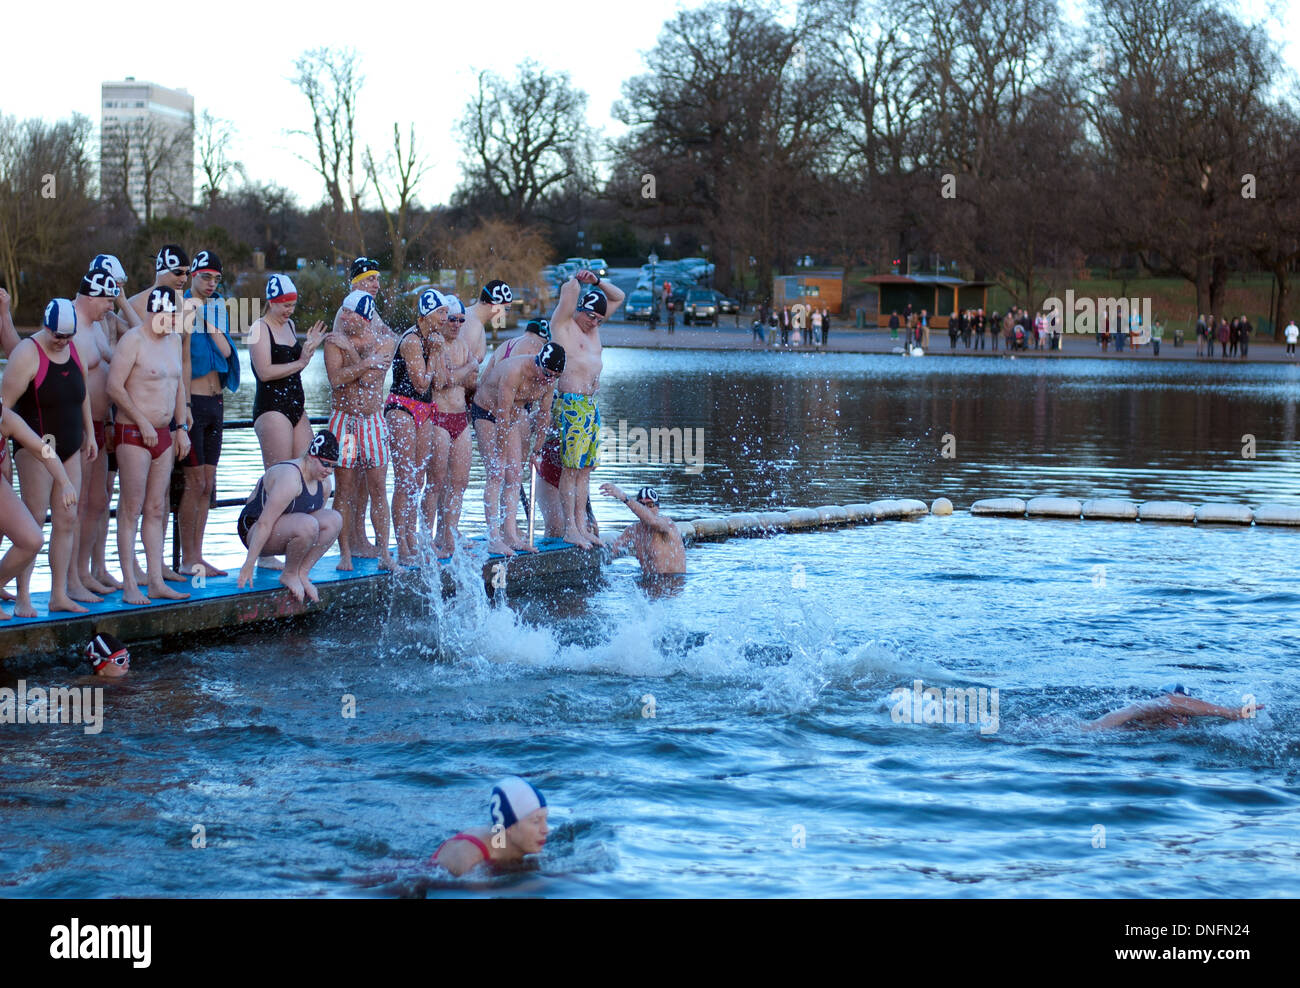 Members of the Serpentine Swimming Club making a splash in the icy Serpentine waters during the annual Christmas Day swim Stock Photo